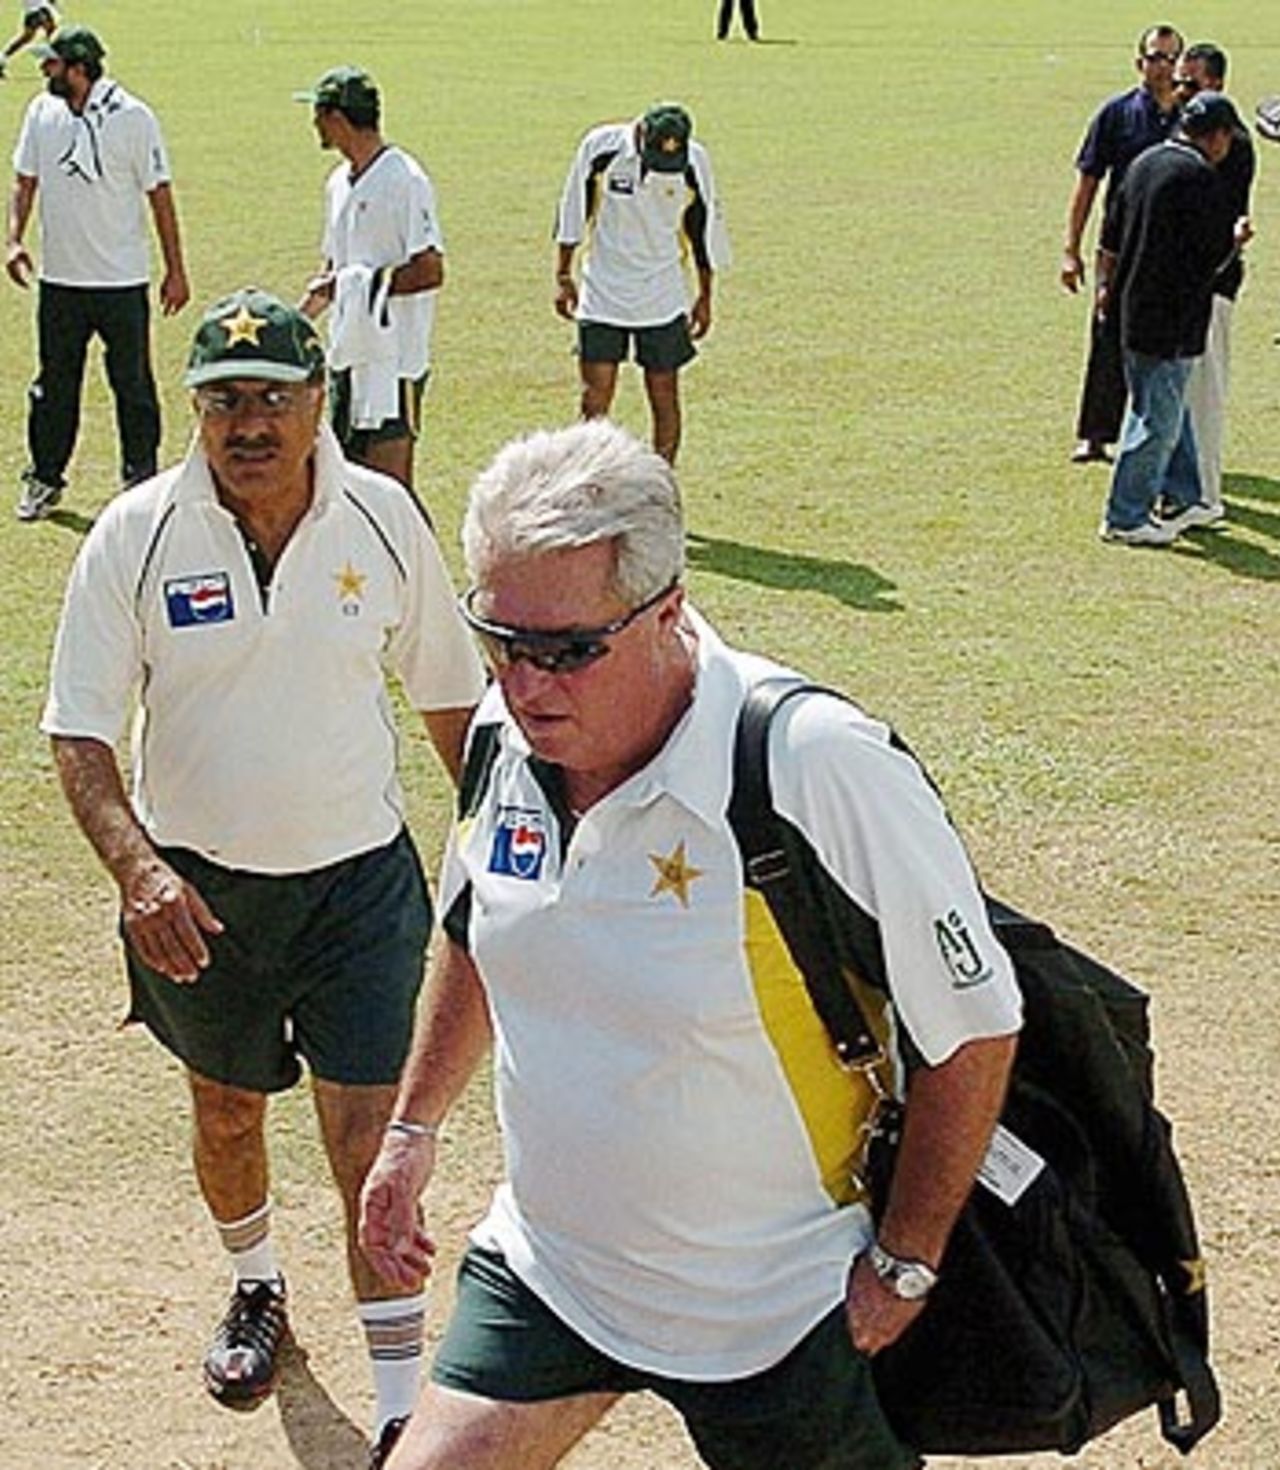 A less than impressed Bob Woolmer after his practice session was postponed because the ground was occupied by a softball match, Colombo March 14 2006